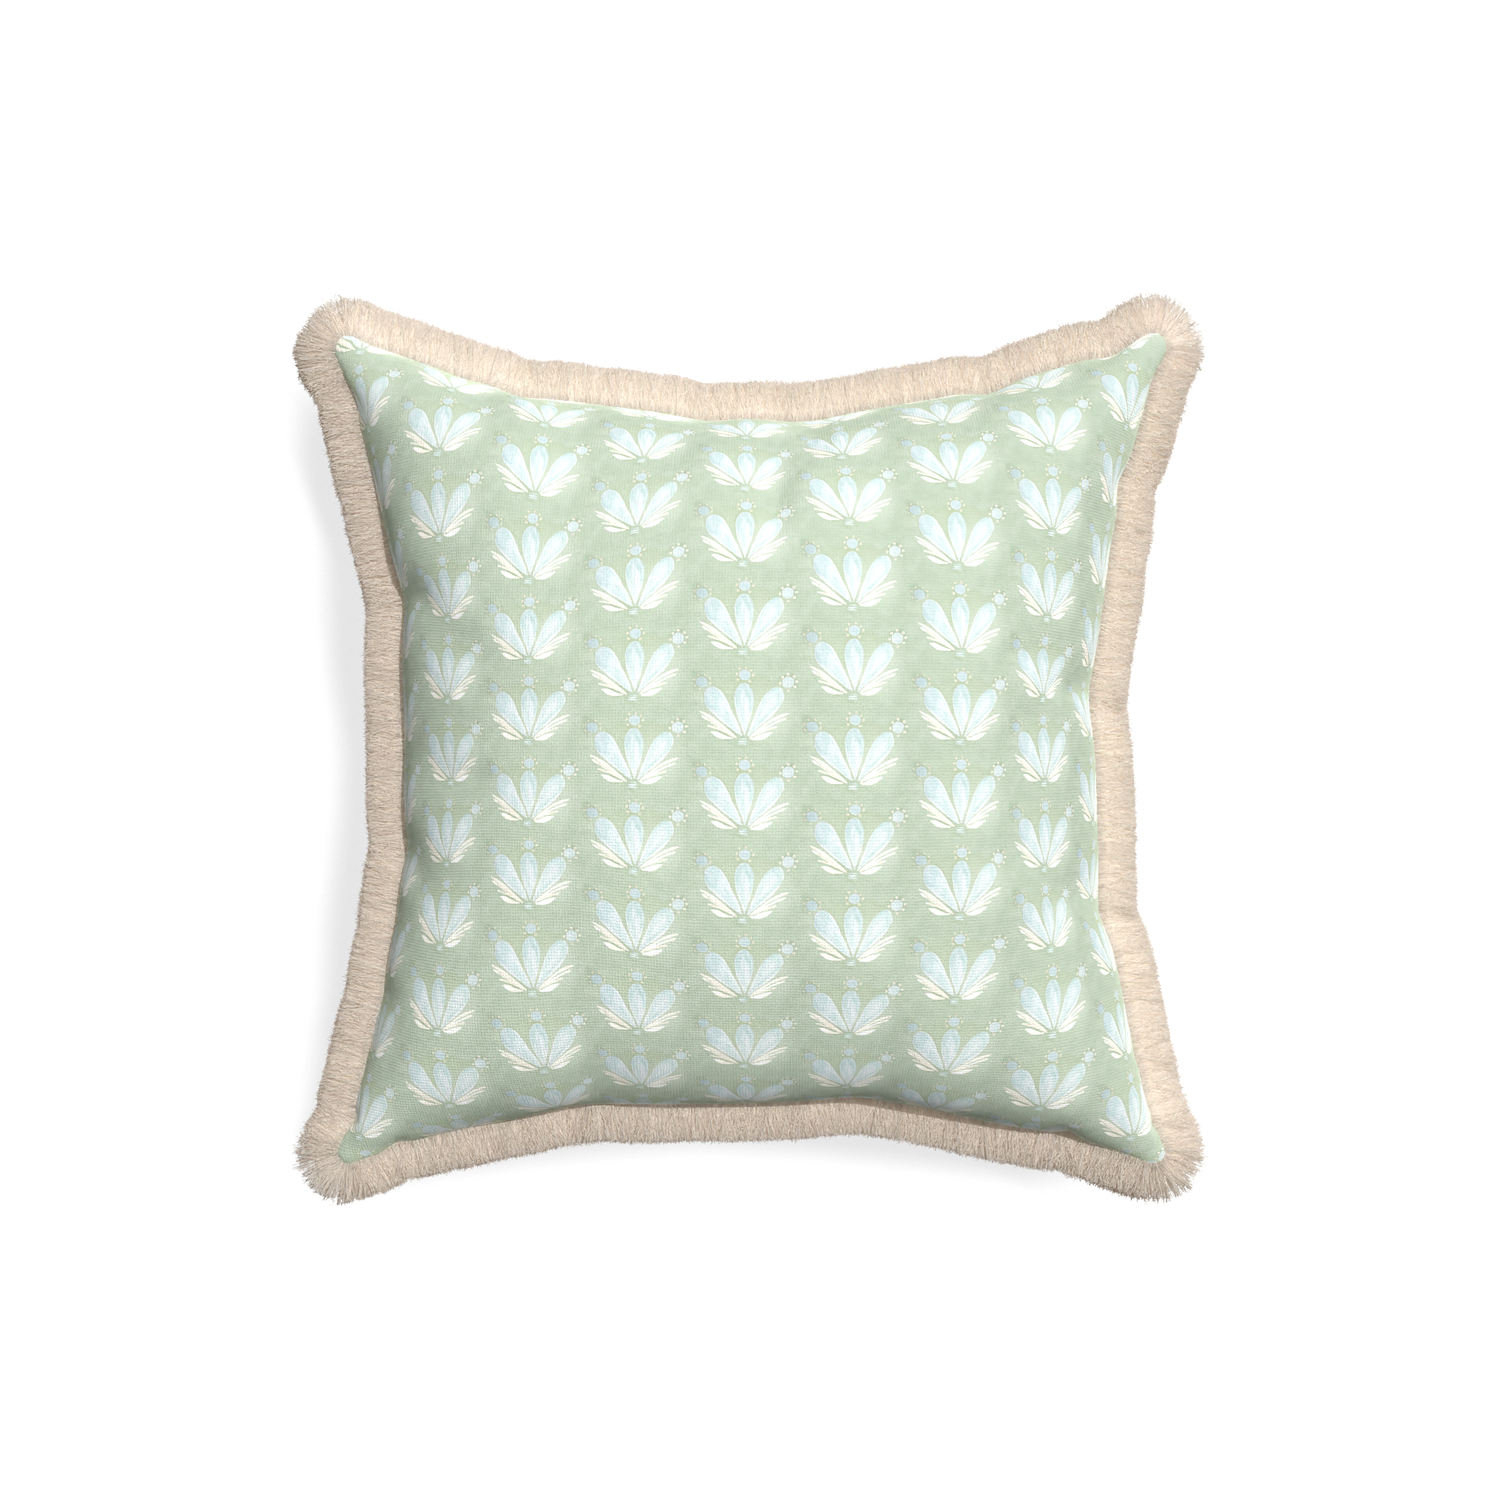 18-square serena sea salt custom blue & green floral drop repeatpillow with cream fringe on white background